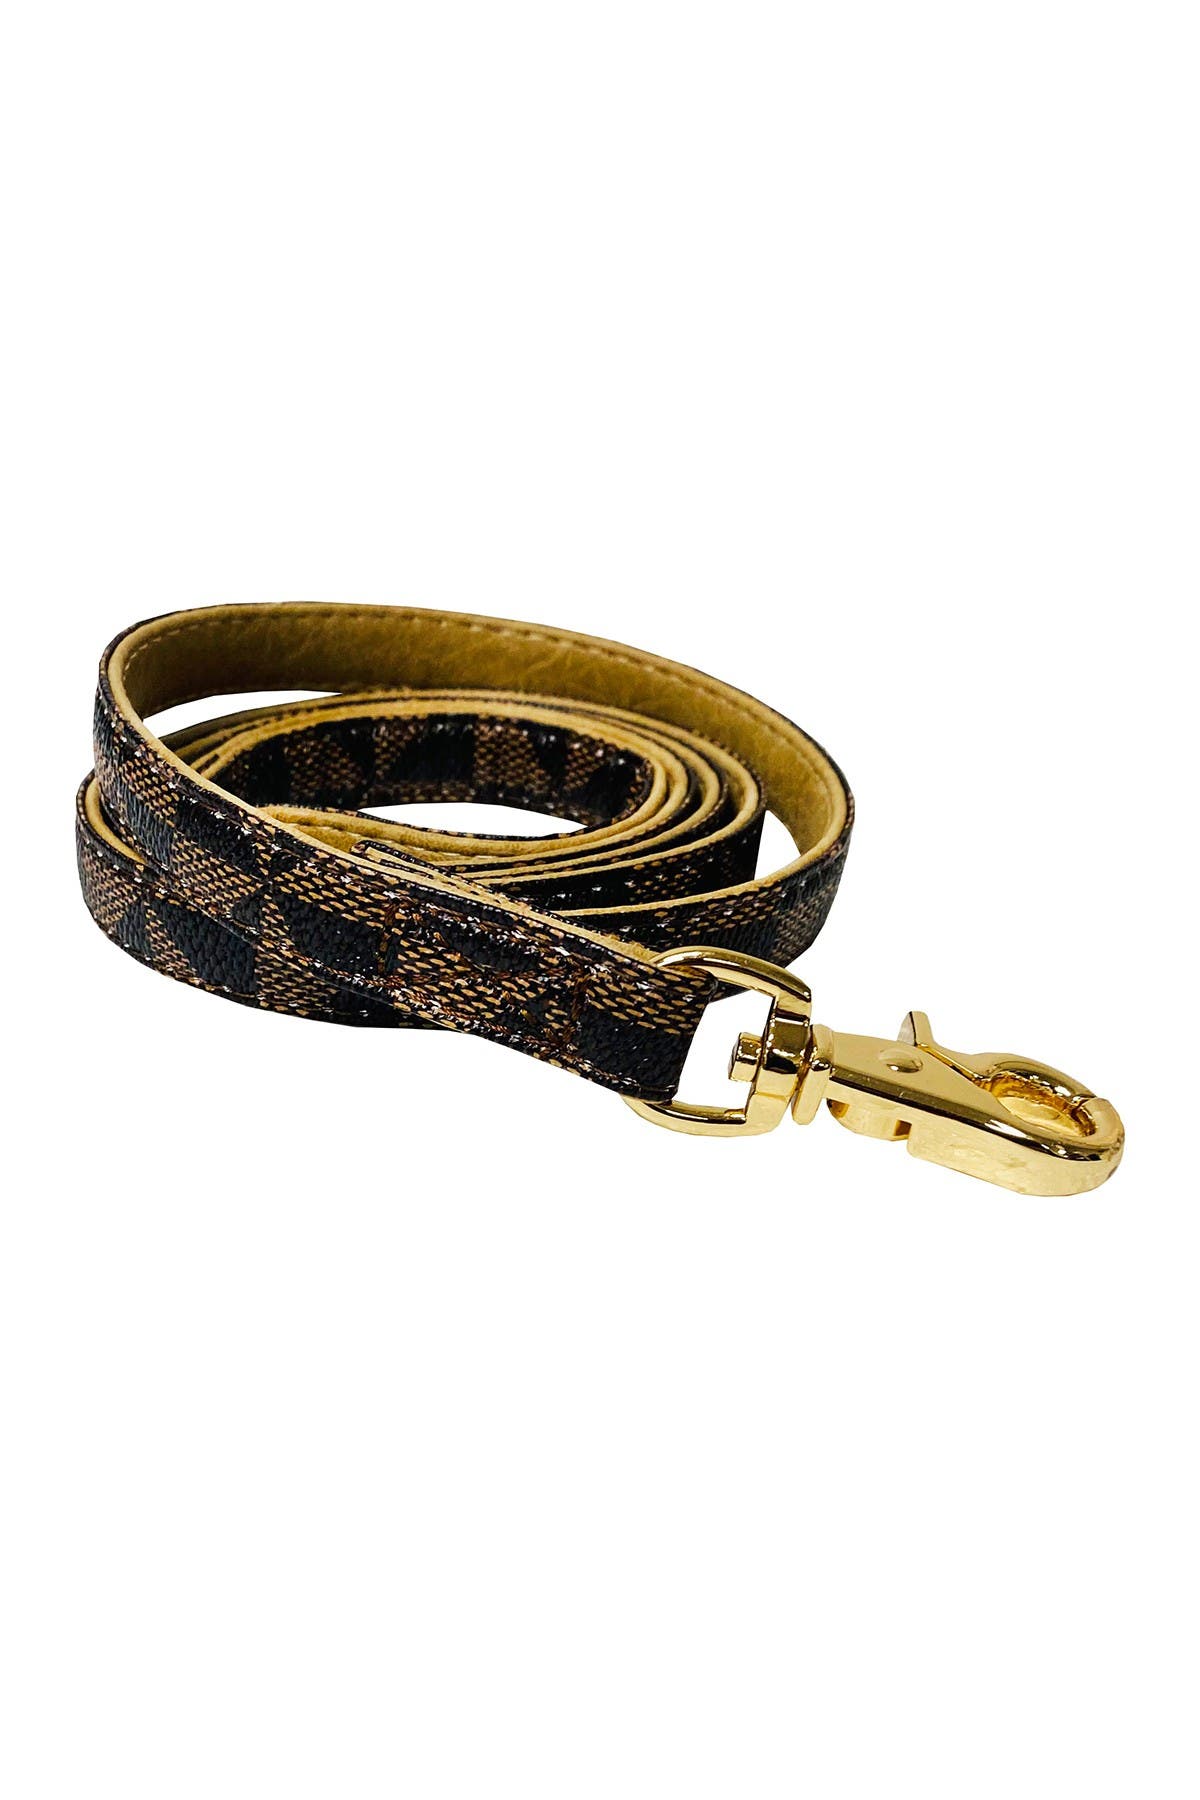 Dogs Of Glamour Evelyn Luxury Leash Brown